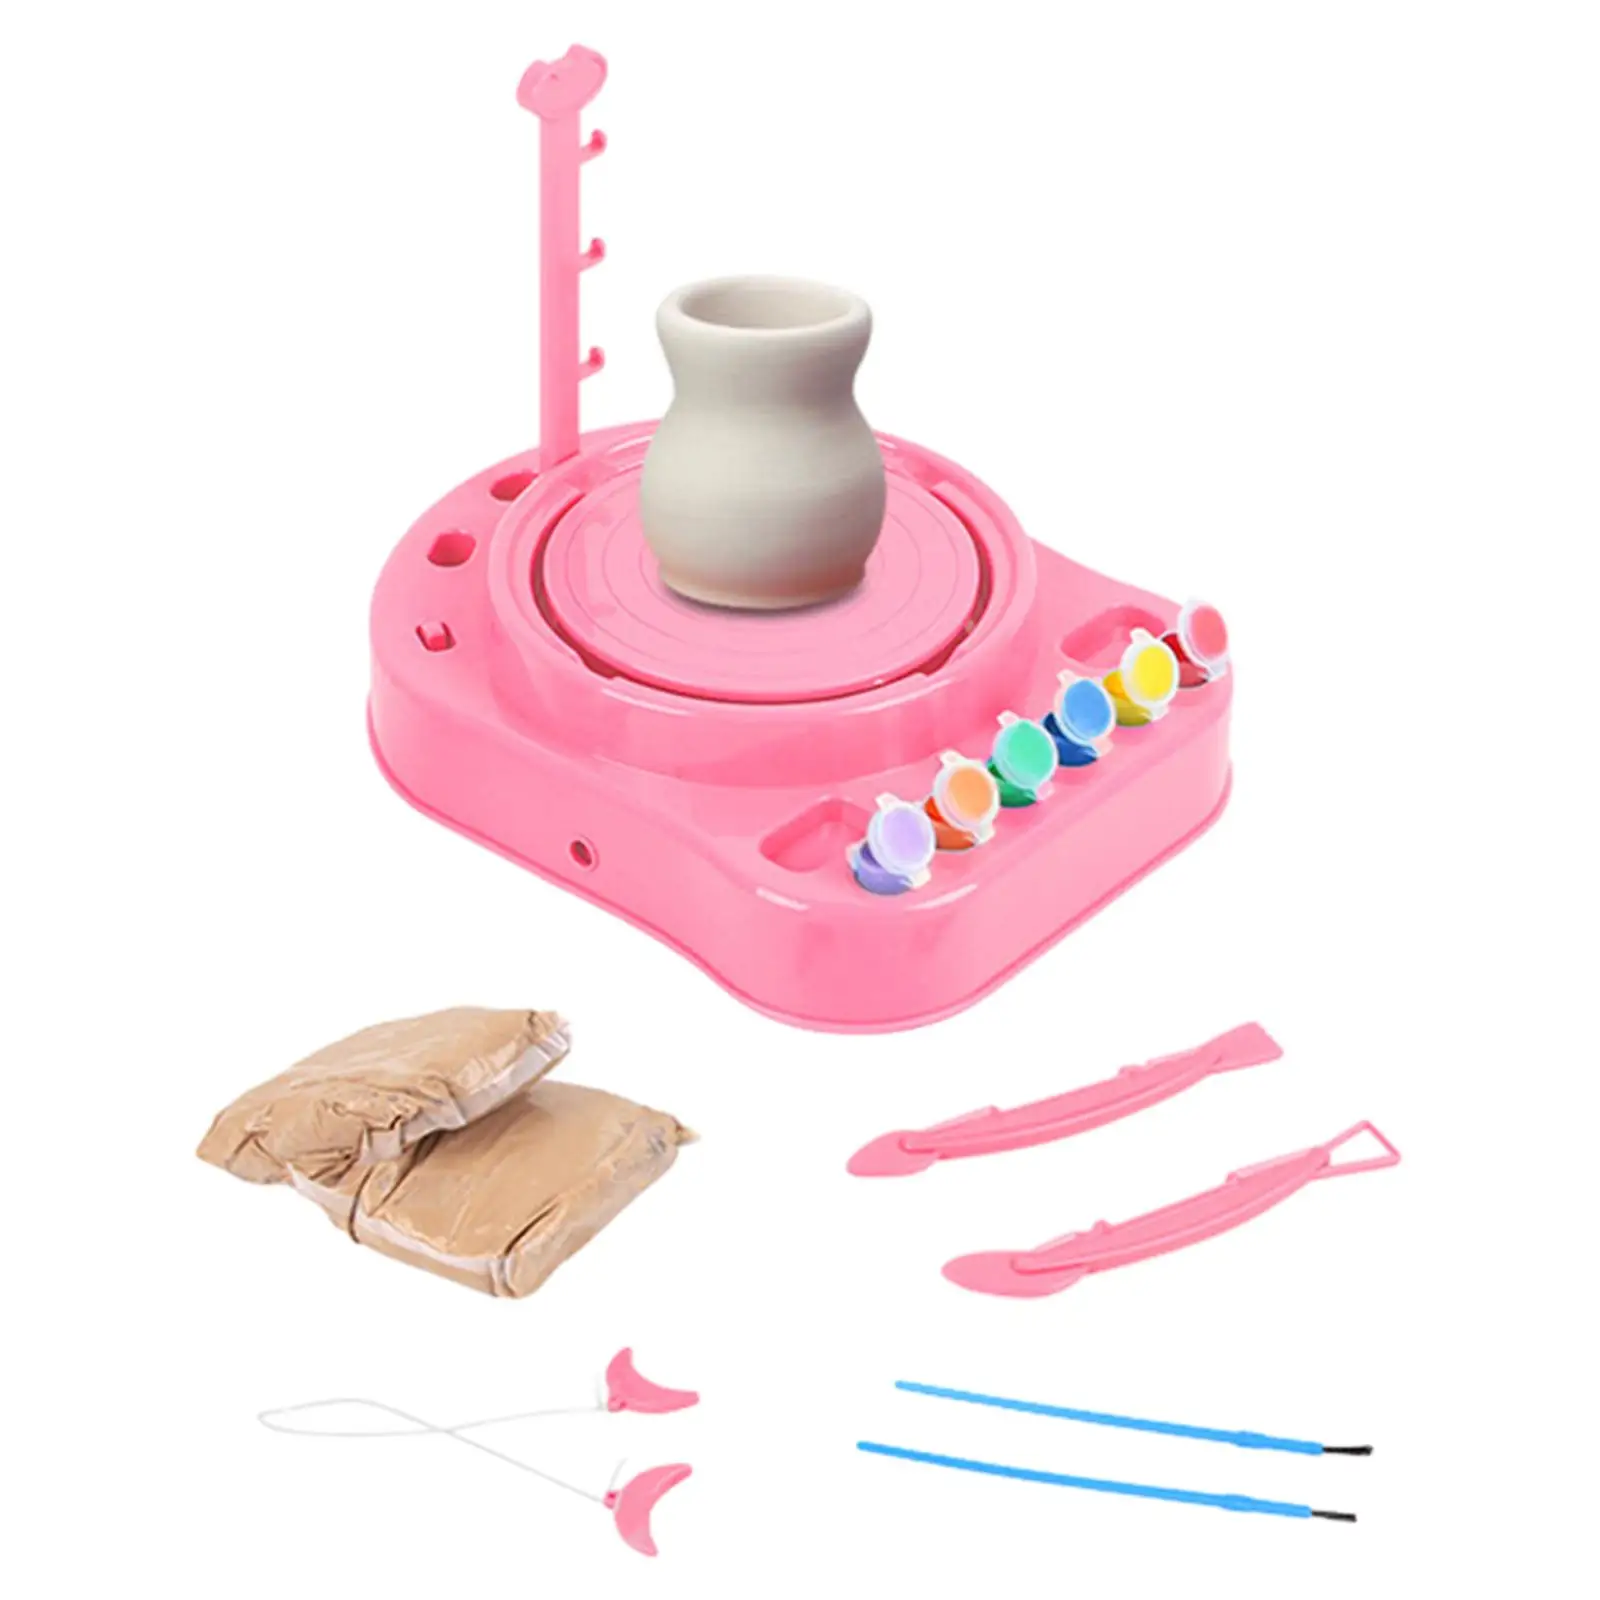 Kids Pottery Forming Machine Educational DIY Pottery Wheel for Kids for Problem Solving Coordination Fine Motor Skills Prechool